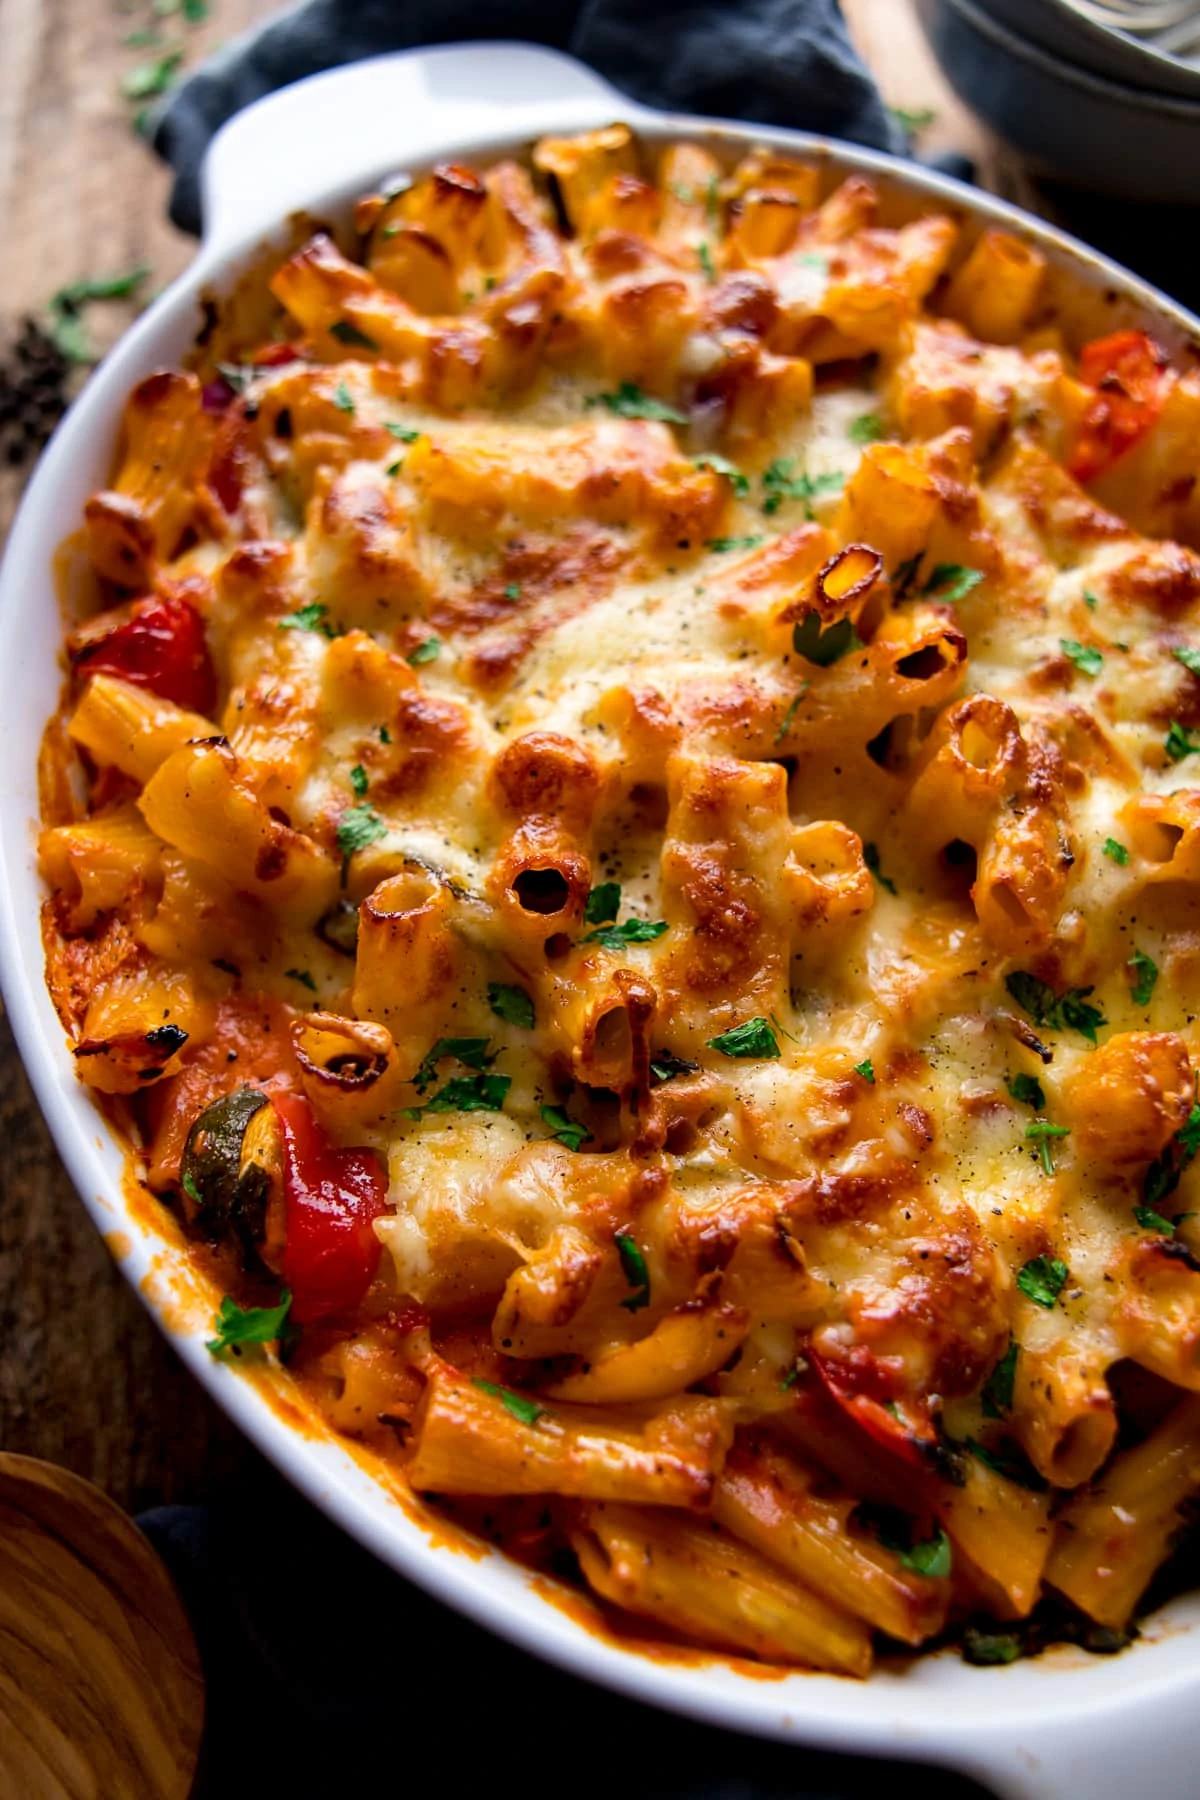 Close up image of a dish of vegetable pasta bake